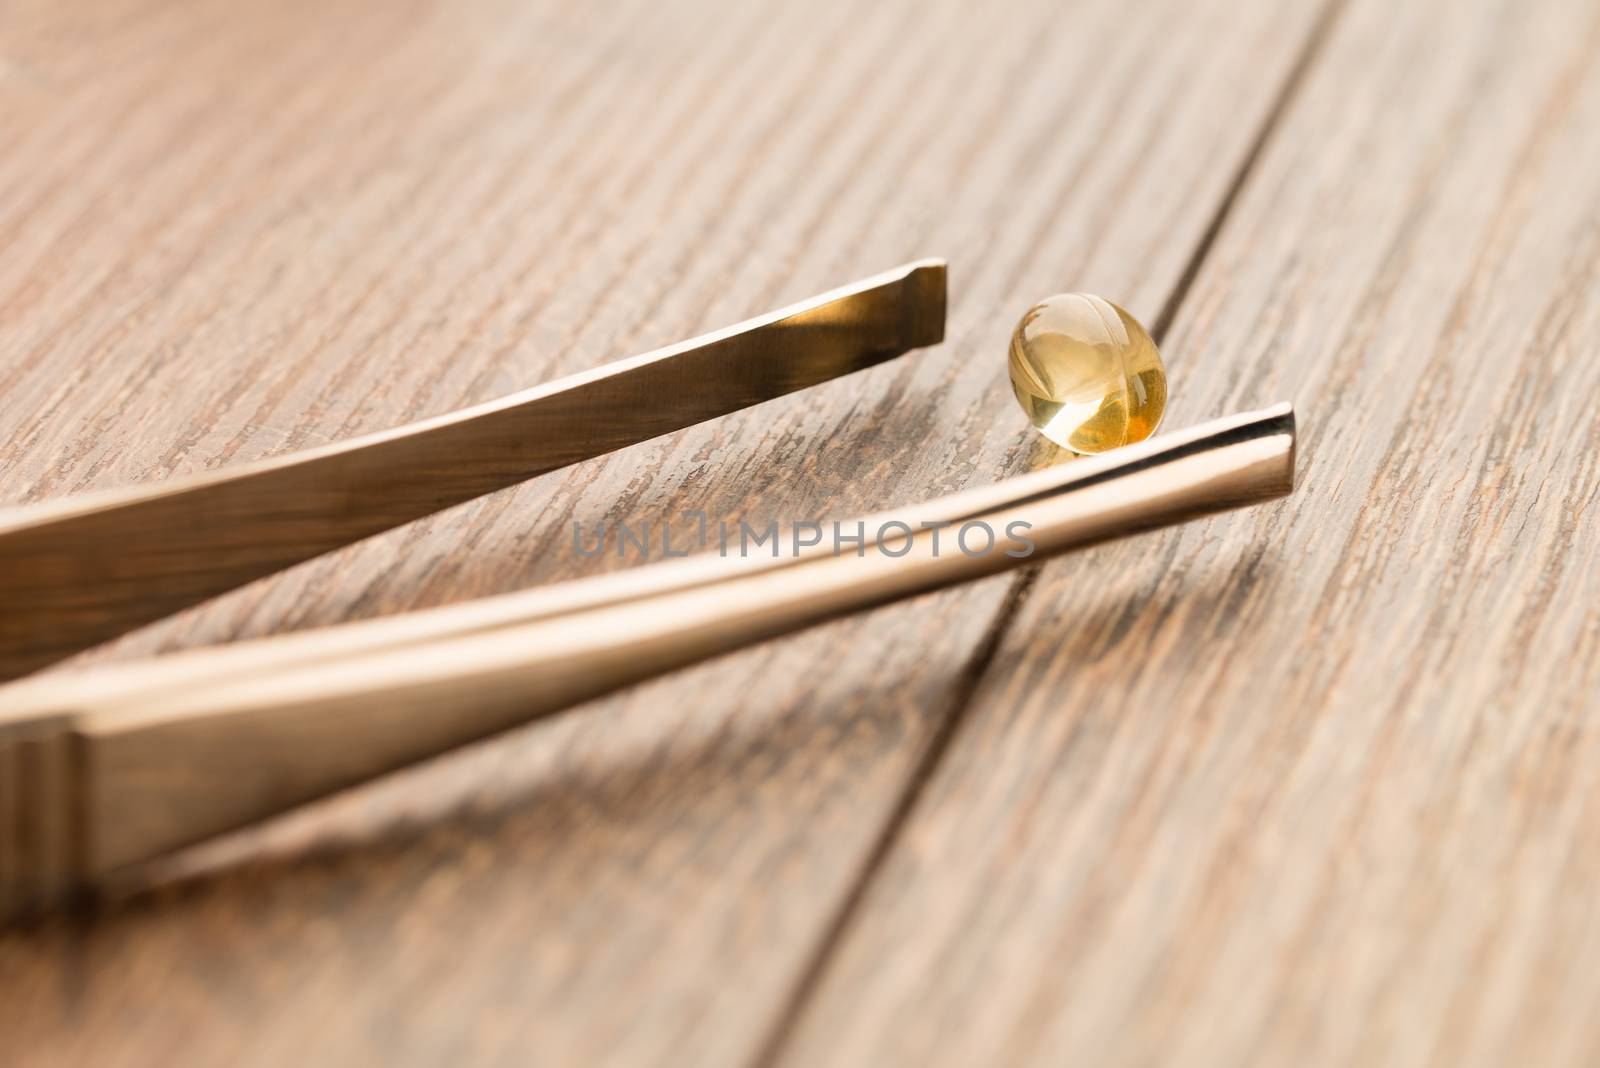 Fish oil pill in tweezer on wooden table background